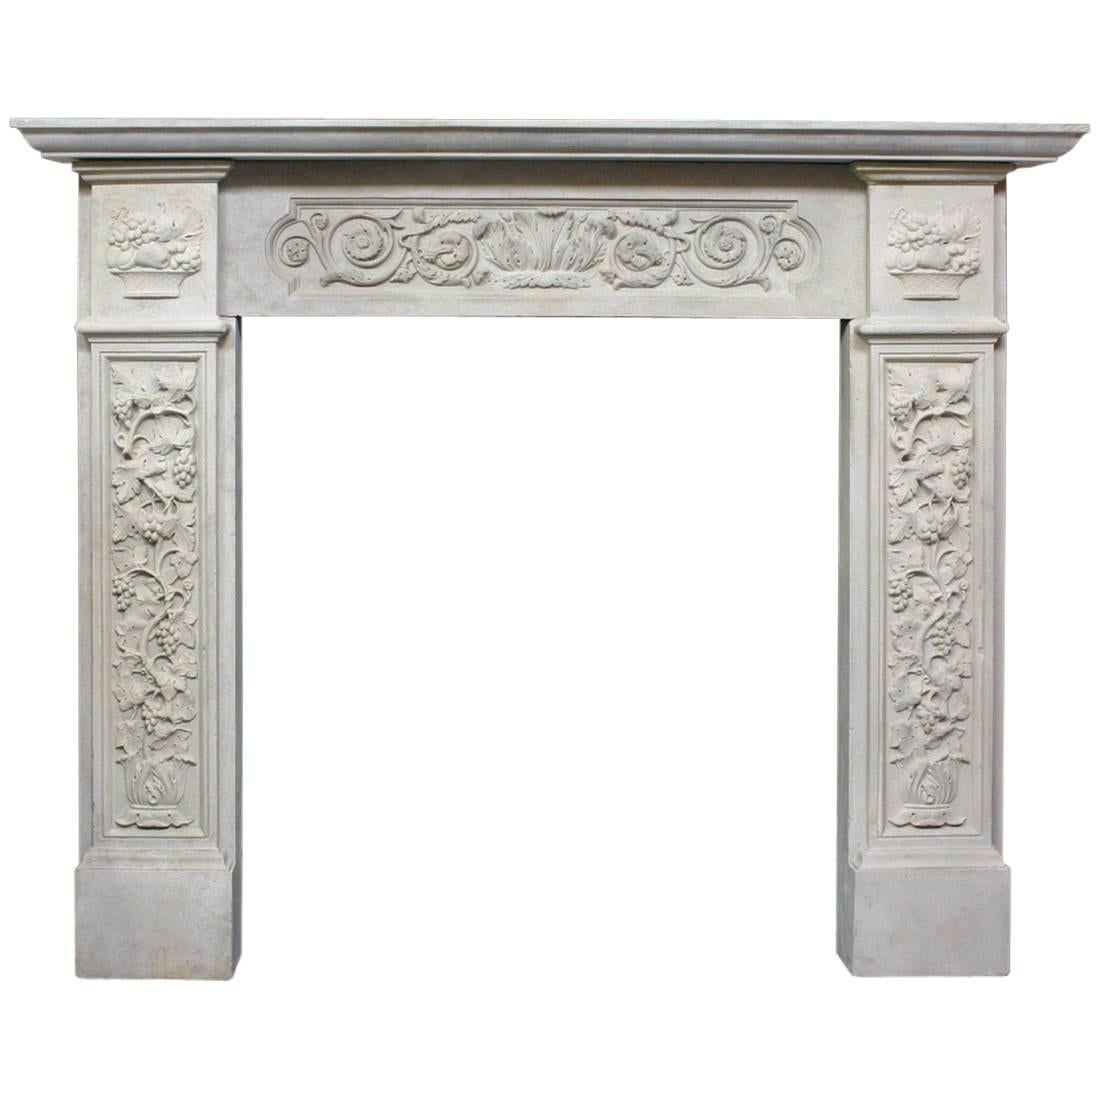 19th Century Victorian Composition Stone Fireplace Mantel